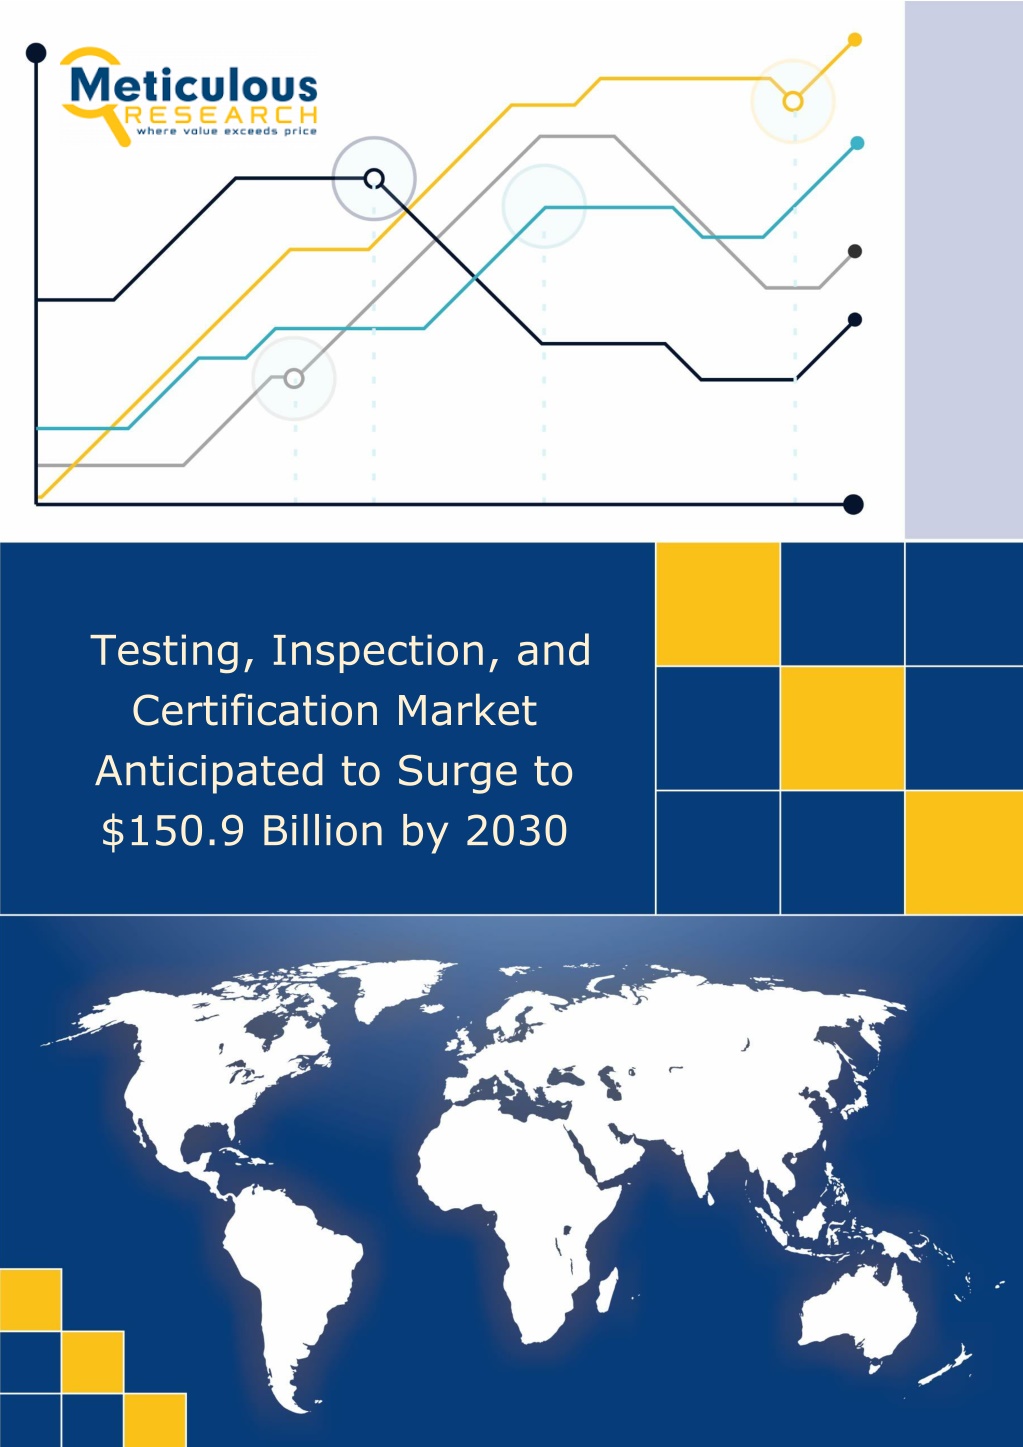 testing inspection and certification market l.w